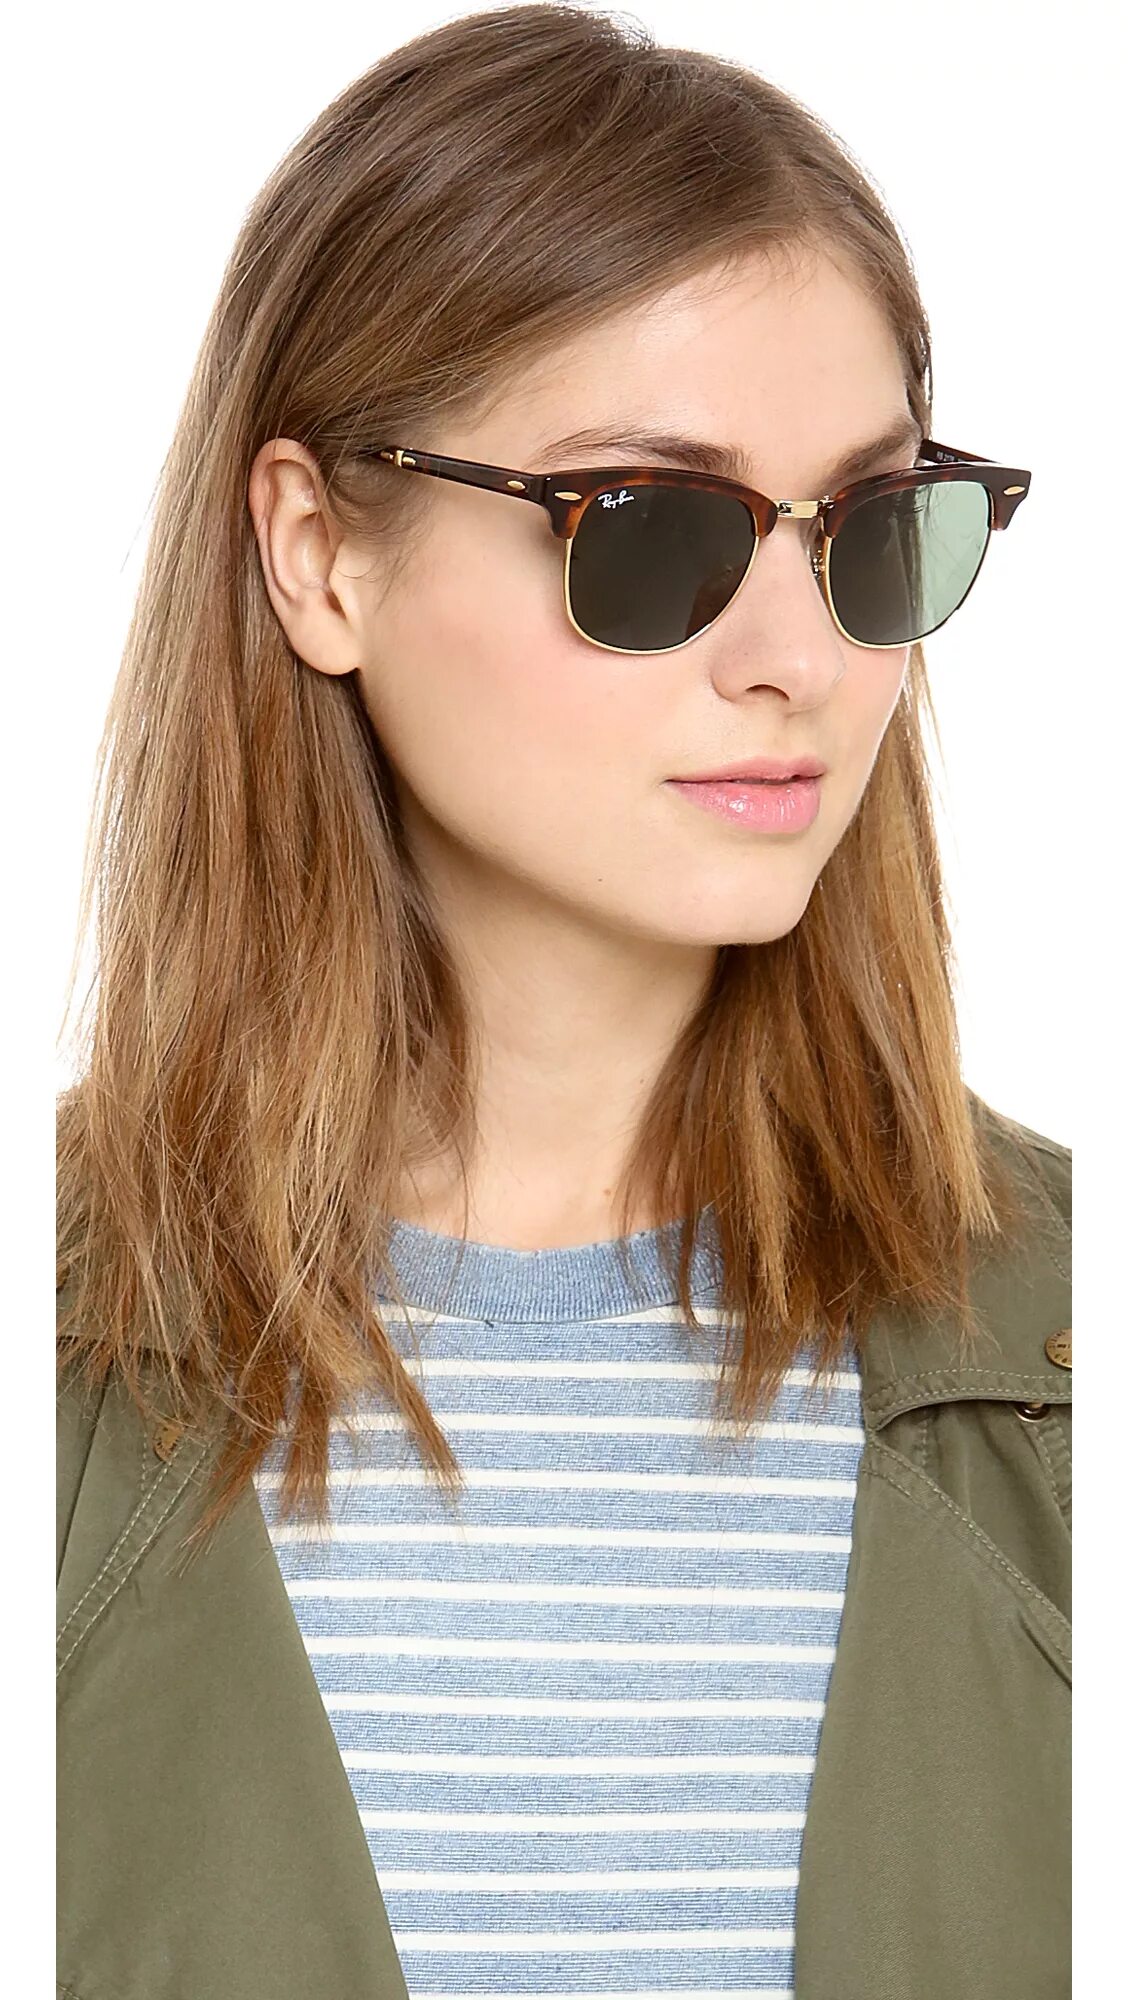 Ray ban clubmaster Classic. Клабмастер ray ban. Очки ray ban clubmaster. Ray-ban clubmaster Classic Sunglasses. Unisex sunglasses